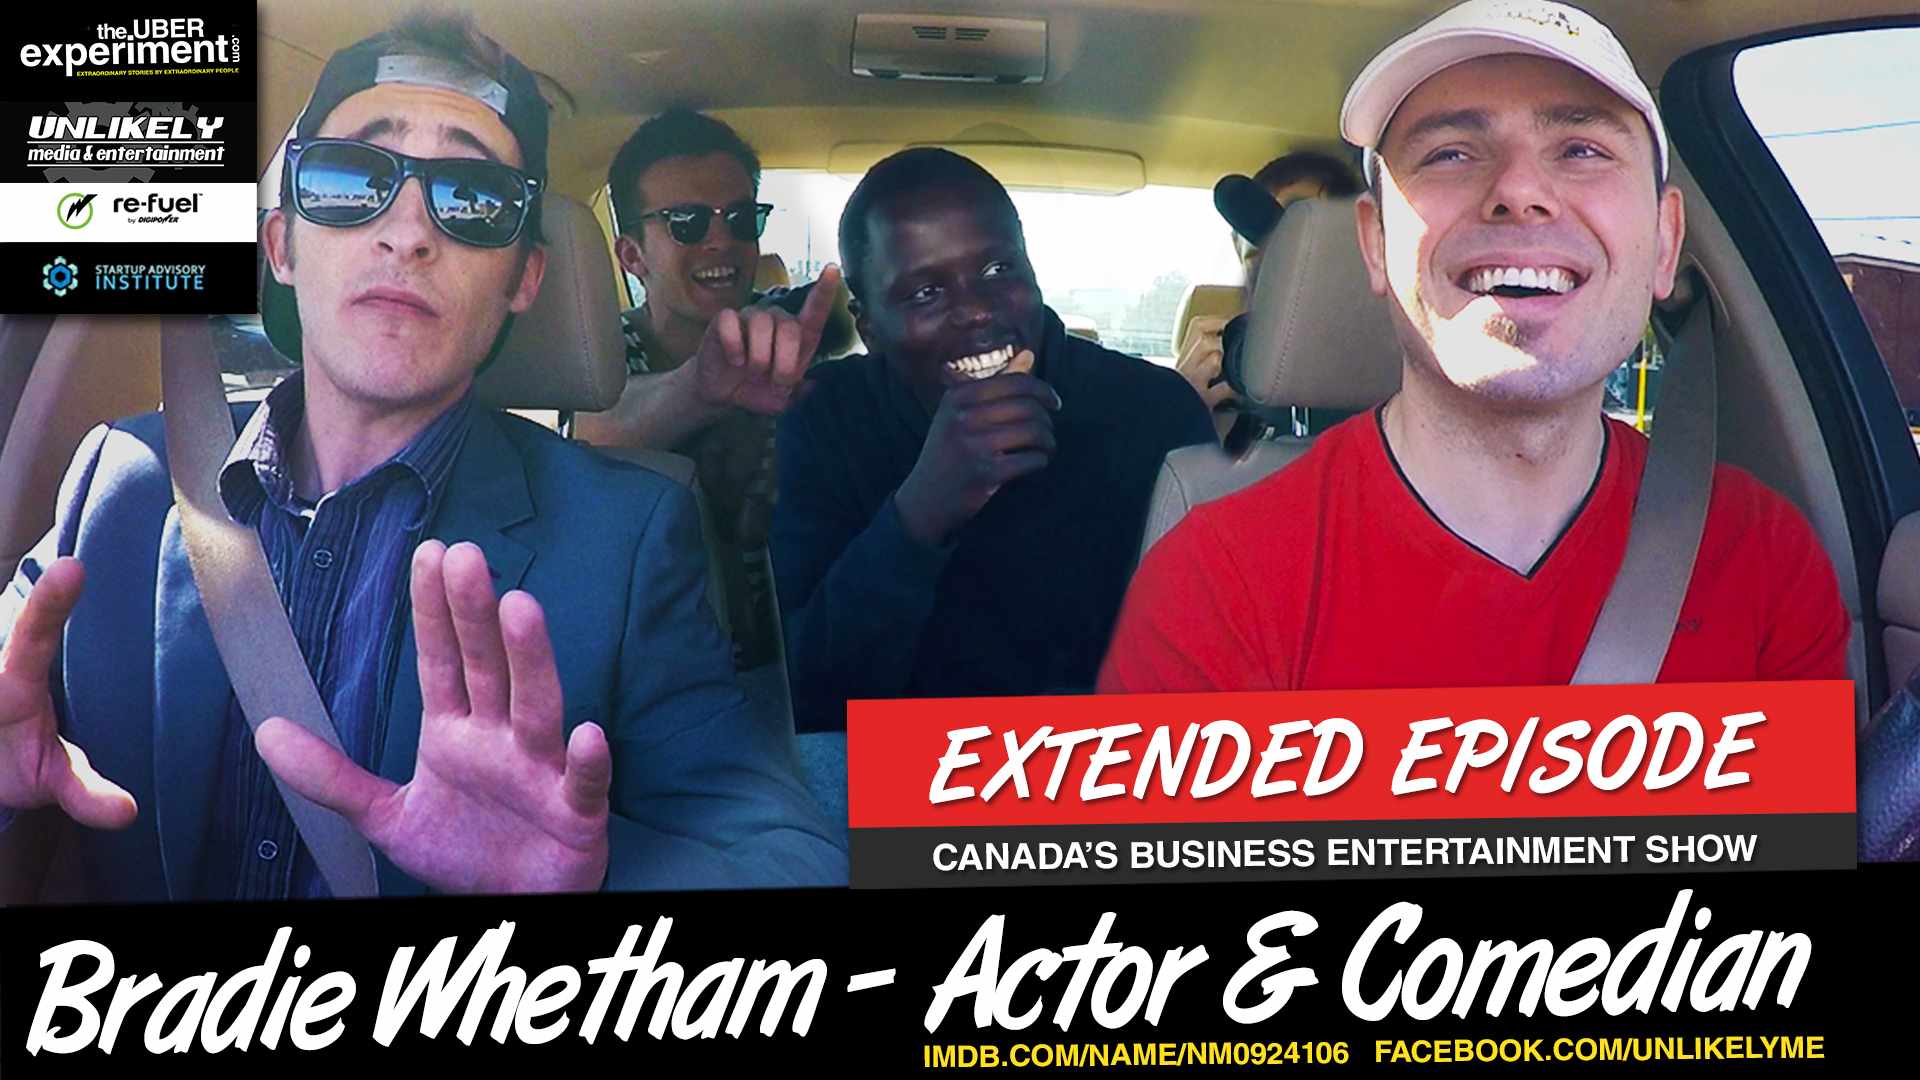 STEWIE GRIFFIN GOT IN MY UBER - Actor Bradie Whetham Rides Business Reality Show The Uber Experiment